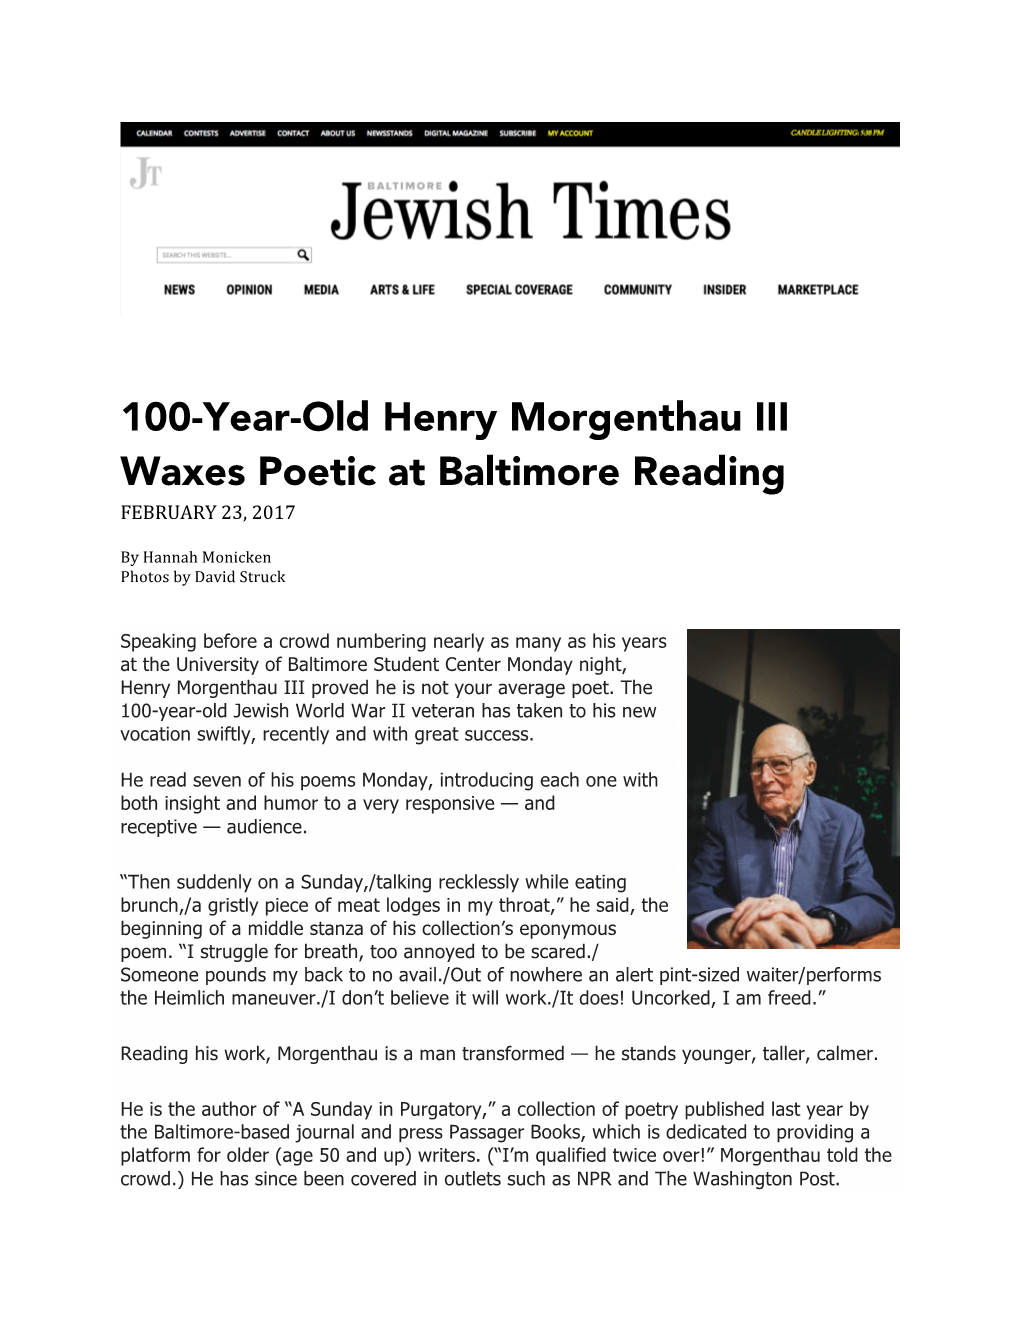 100-Year-Old Henry Morgenthau III Waxes Poetic at Baltimore Reading FEBRUARY 23, 2017